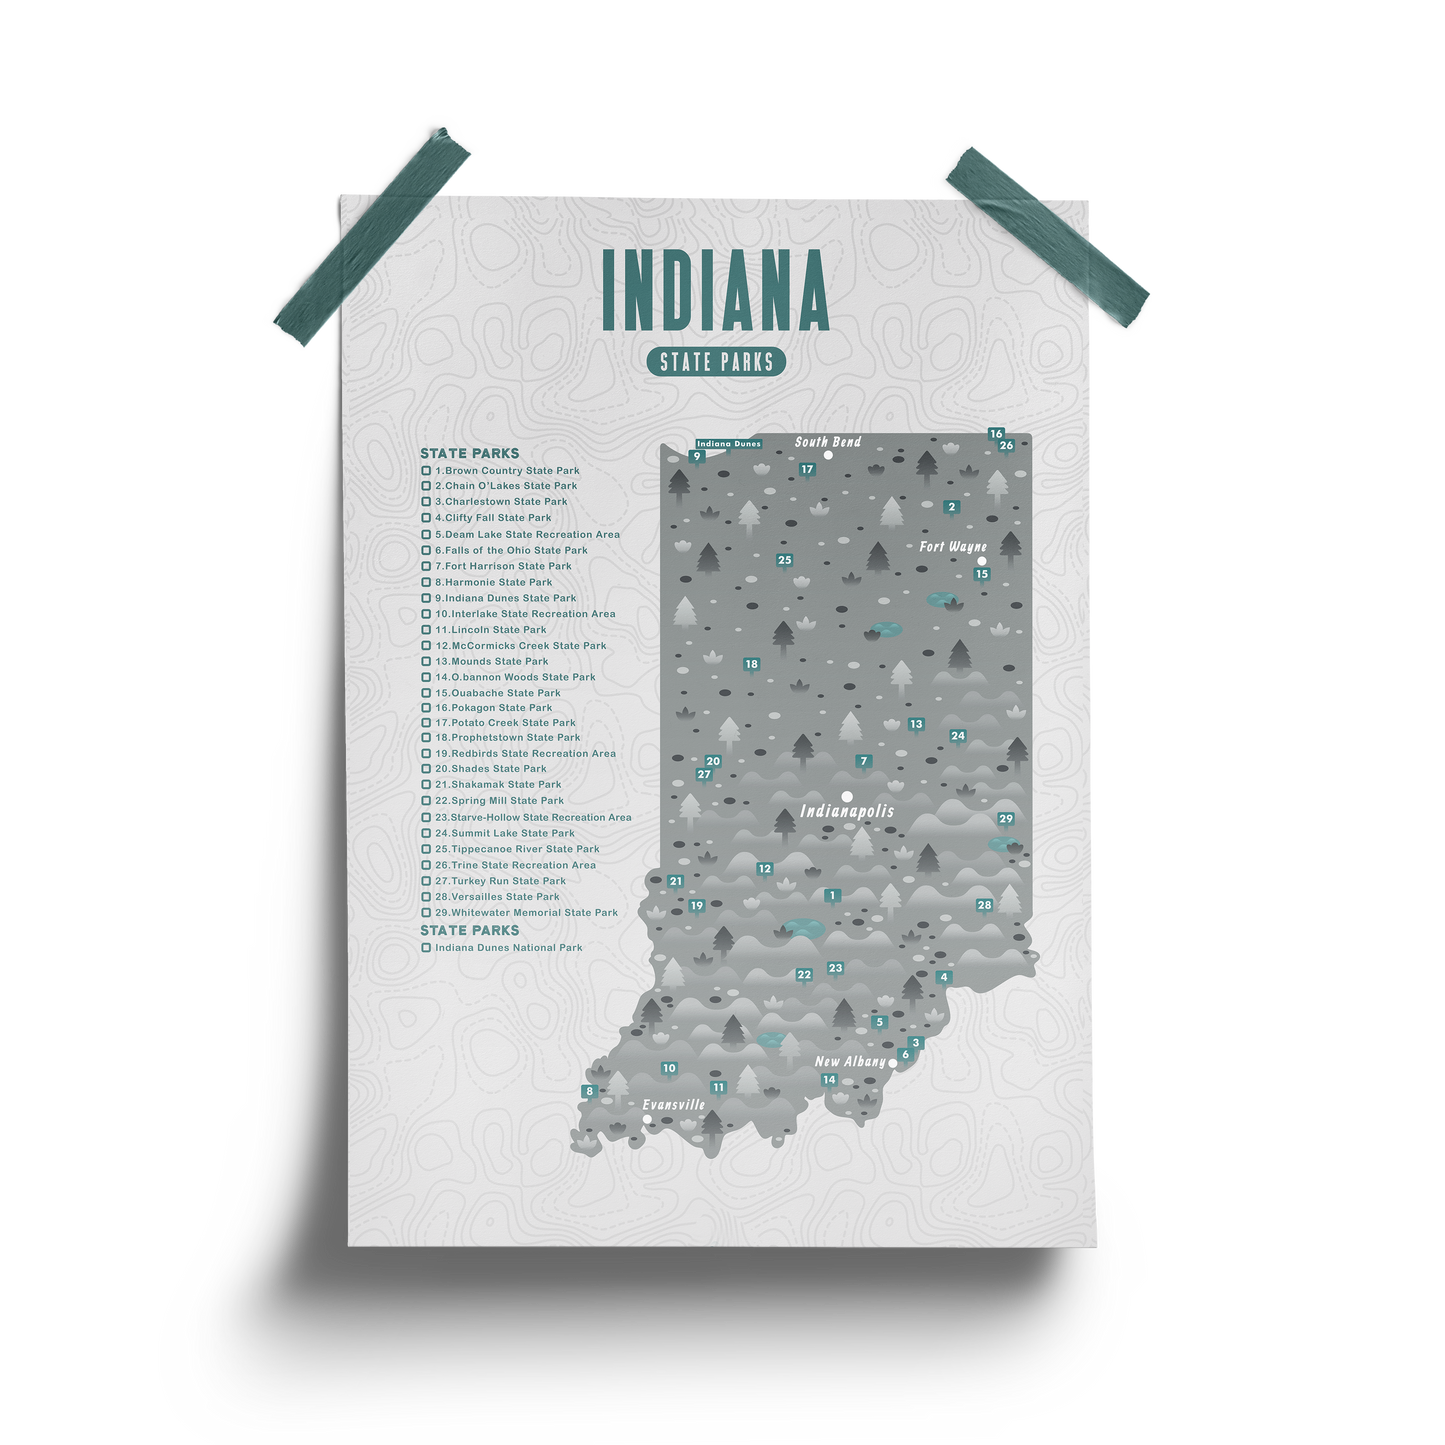 Indiana State Park Map - Checklist